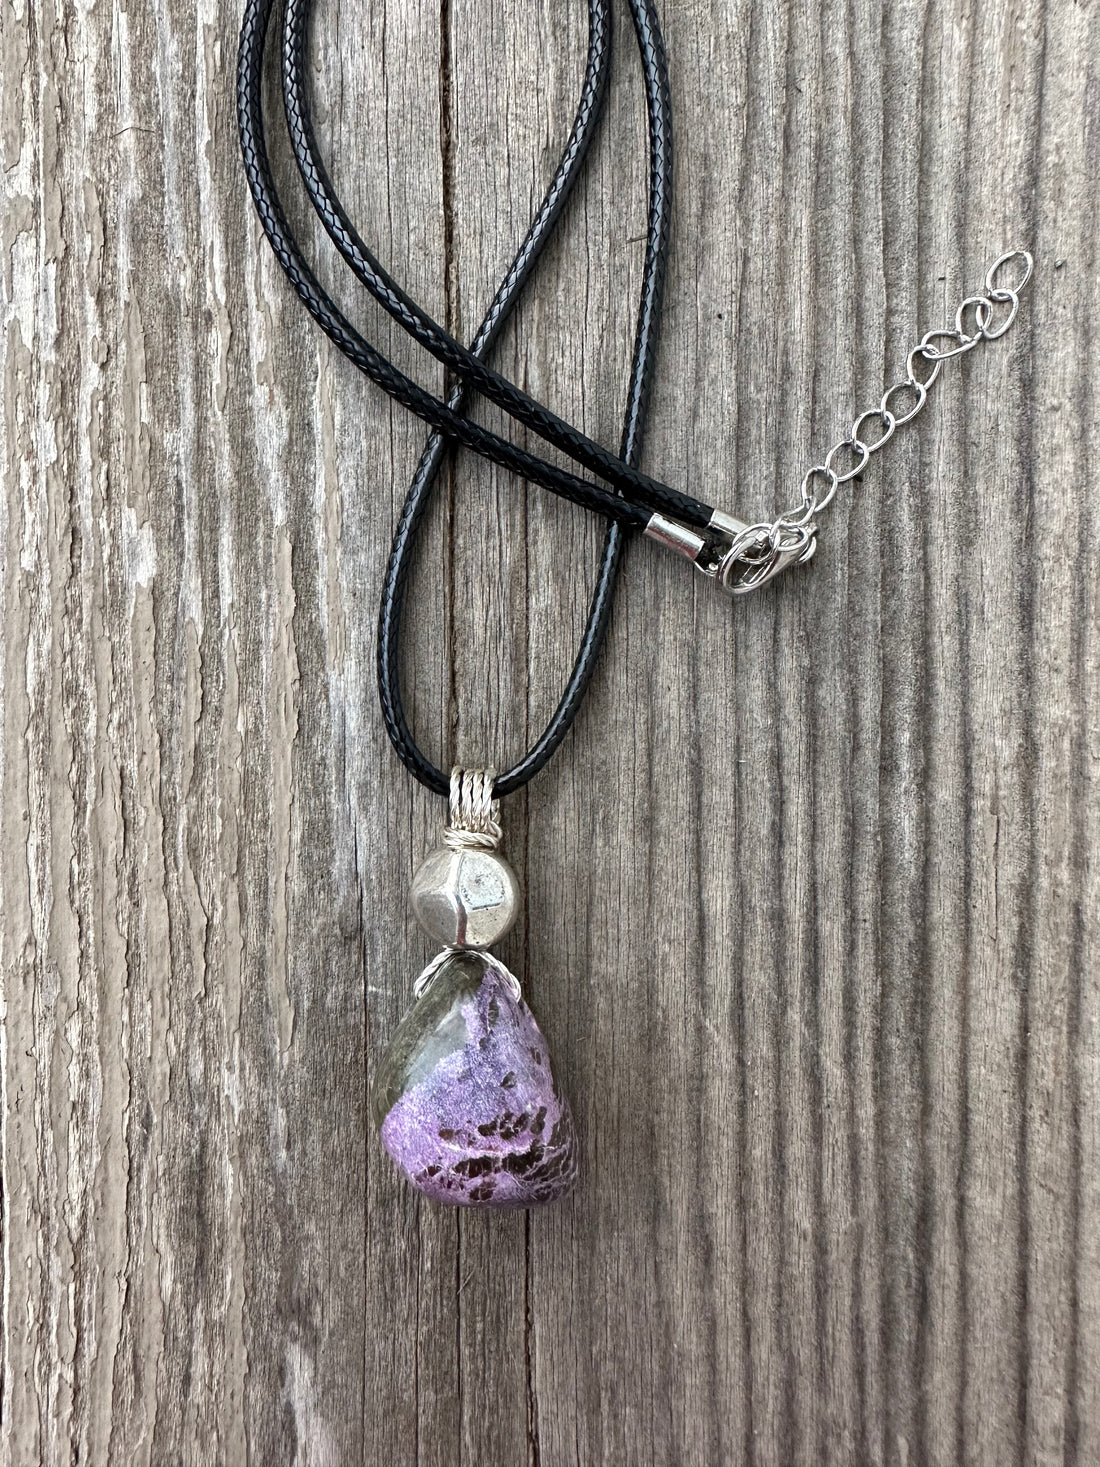 Stichtite Pendant for a Connection to Spiritual Realms. Great Stone for Shielding. Swirl Signifies Consciousness.